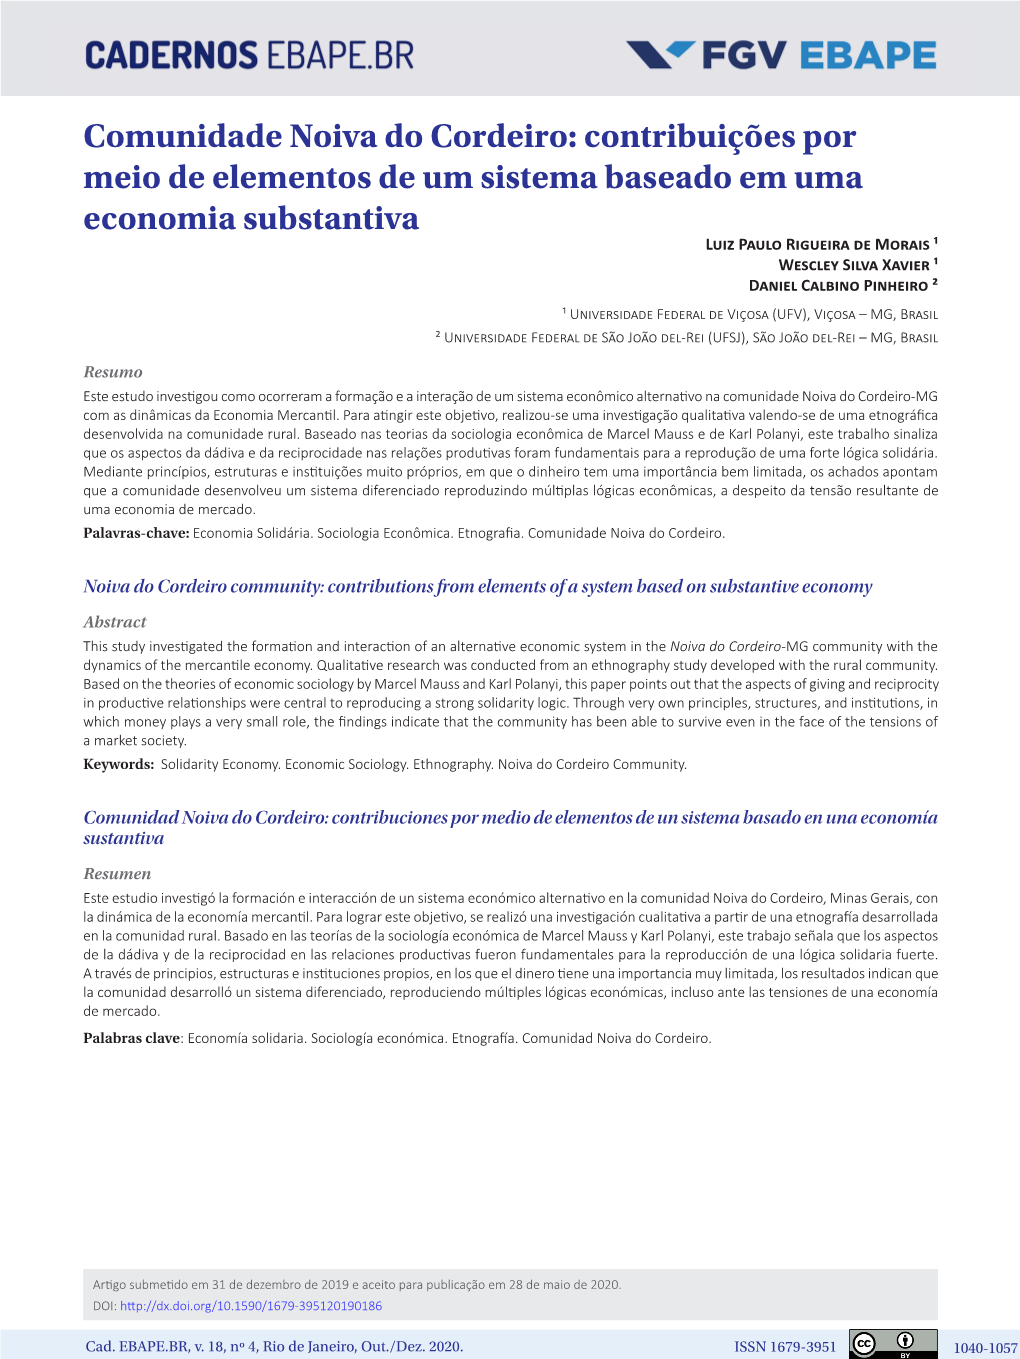 Noiva Do Cordeiro Community: Contributions from Elements of a System Based on Substantive Economy